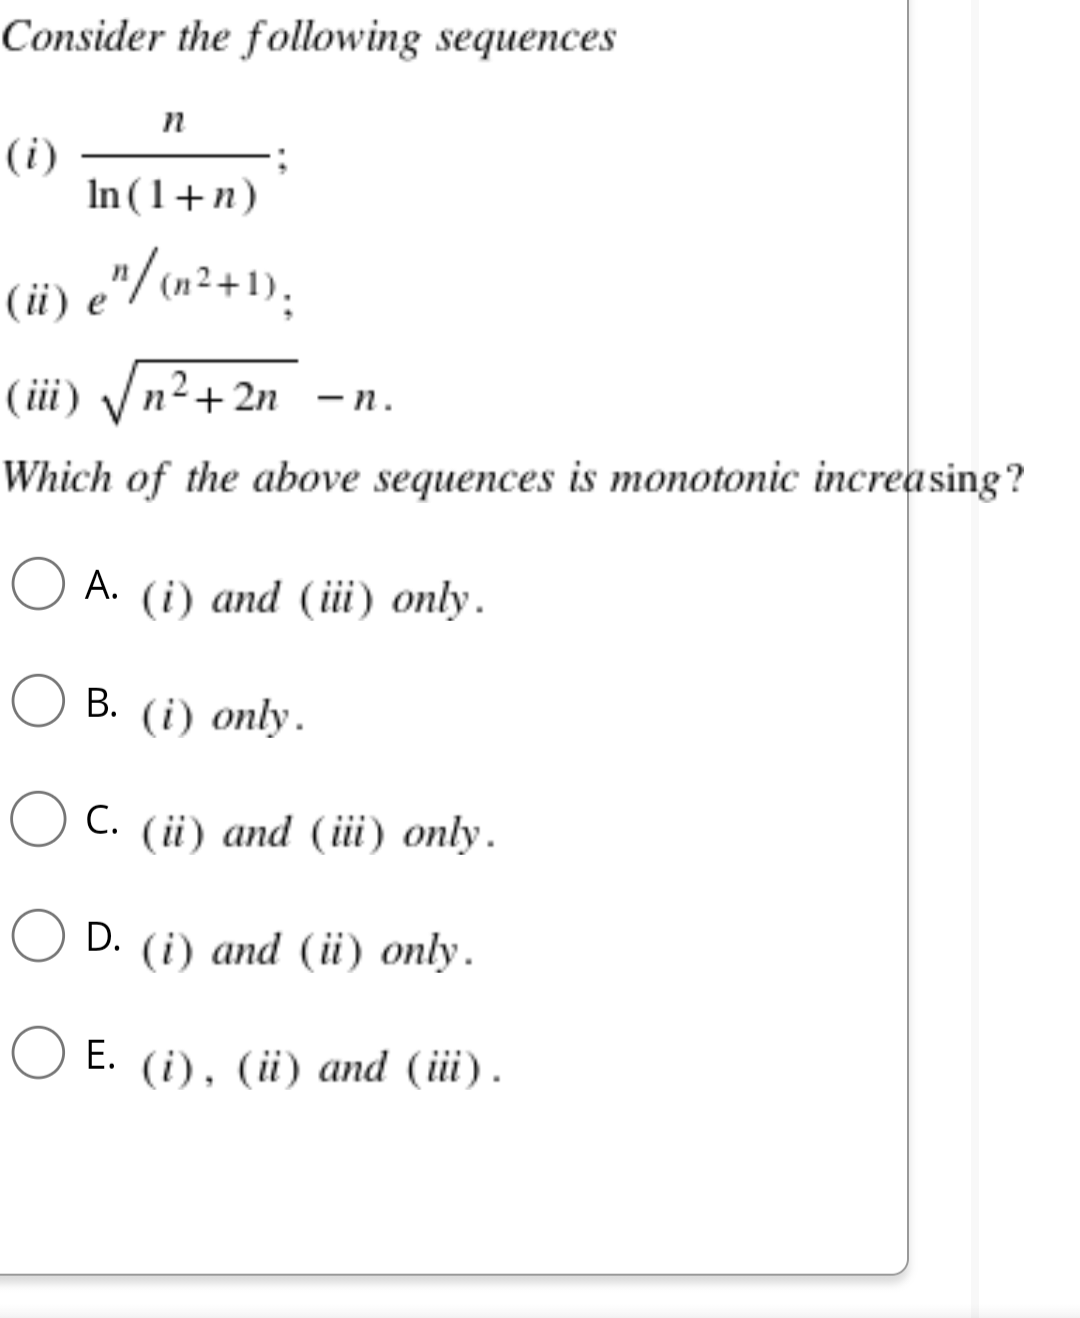 Consider the following sequences
n
(i)
In (1+n)
(ii) e" (+2+1);
/
(iii) √√n²+2n -n.
Which of the above sequences is monotonic increasing?
A. (i) and (iii) only.
B. (i) only.
C.
(ii) and (iii) only.
O D.
D. (i) and (ii) only.
E. (i), (ii) and (iii).